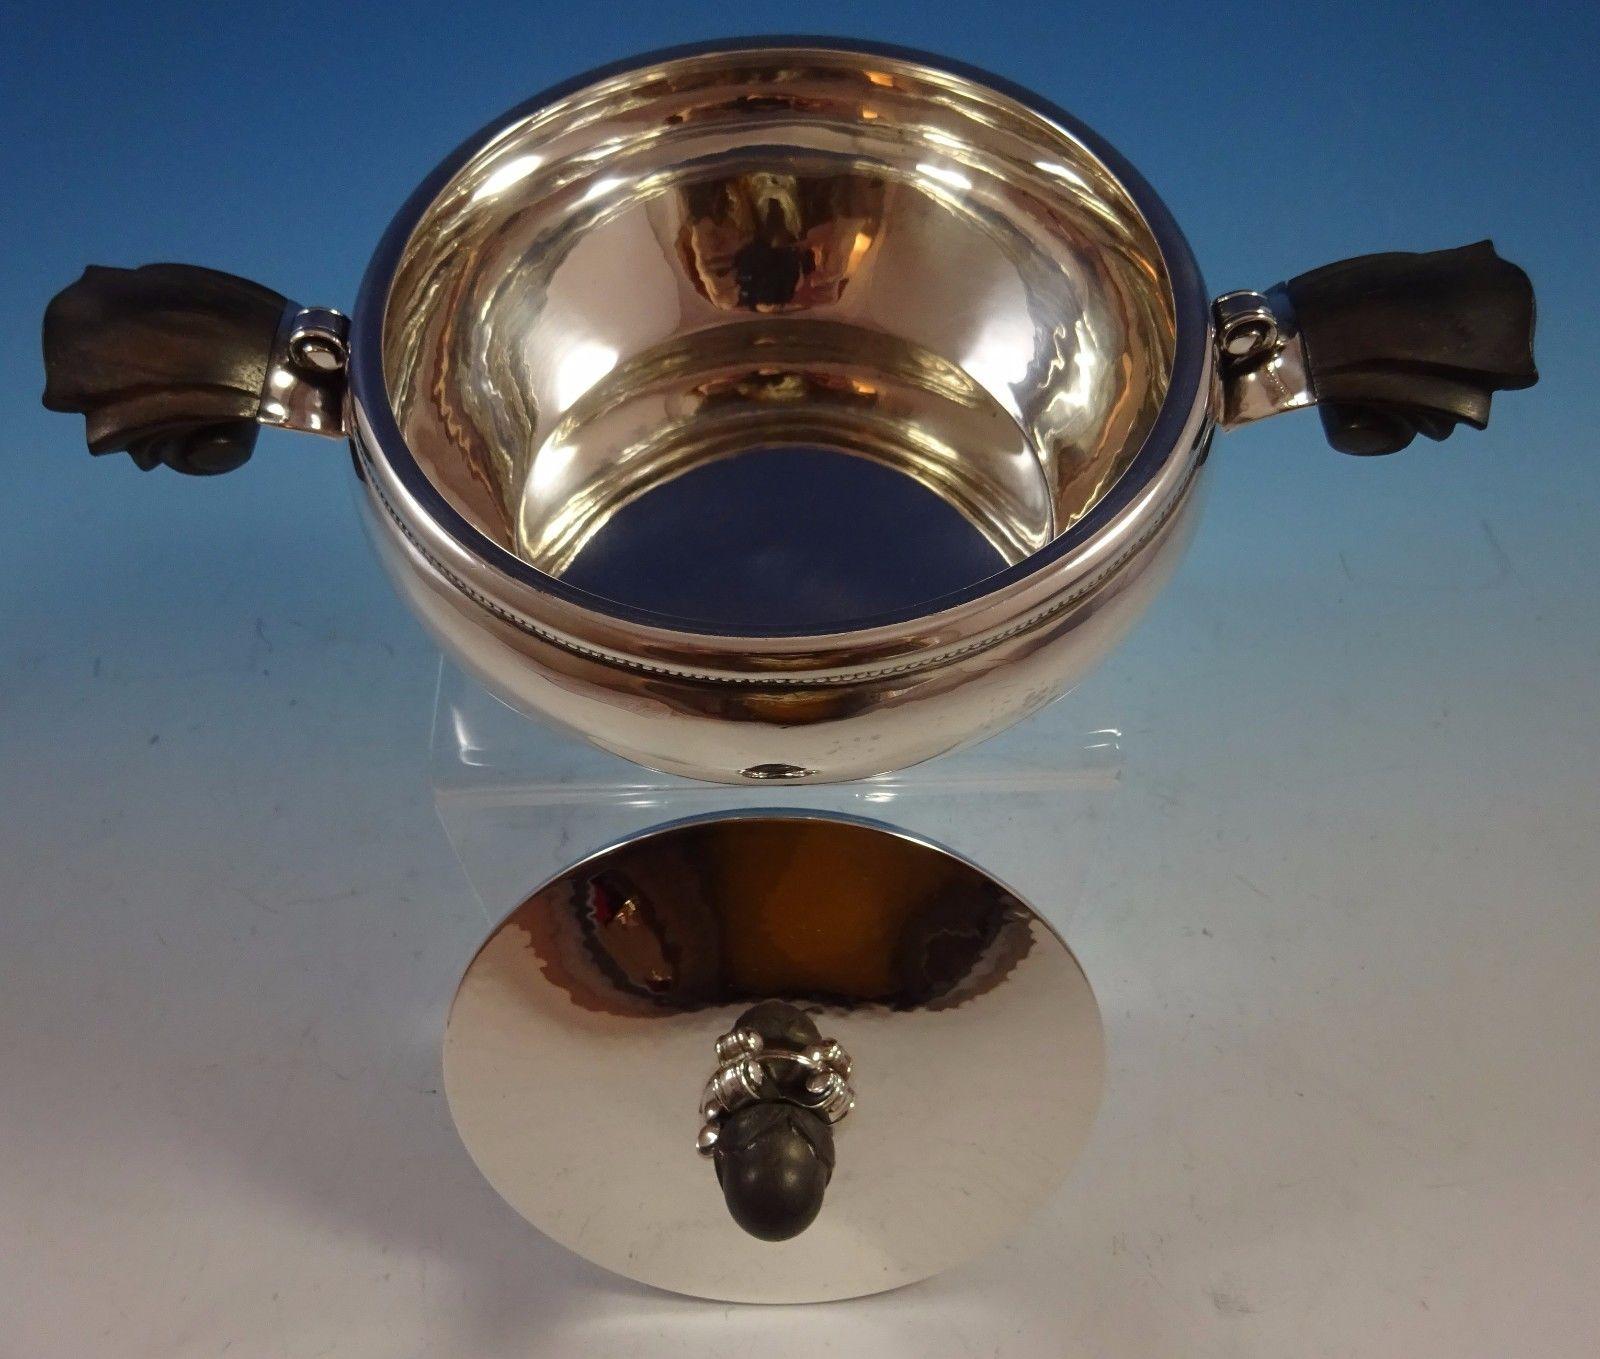 Georg Jensen
Very fine Georg Jensen sterling silver entree dish / vegetable dish with cover featuring carved rosewood handles and finial. The piece has a GI mark for 1910-1930, and it's marked with #613. Also has English import mark for 1930. The